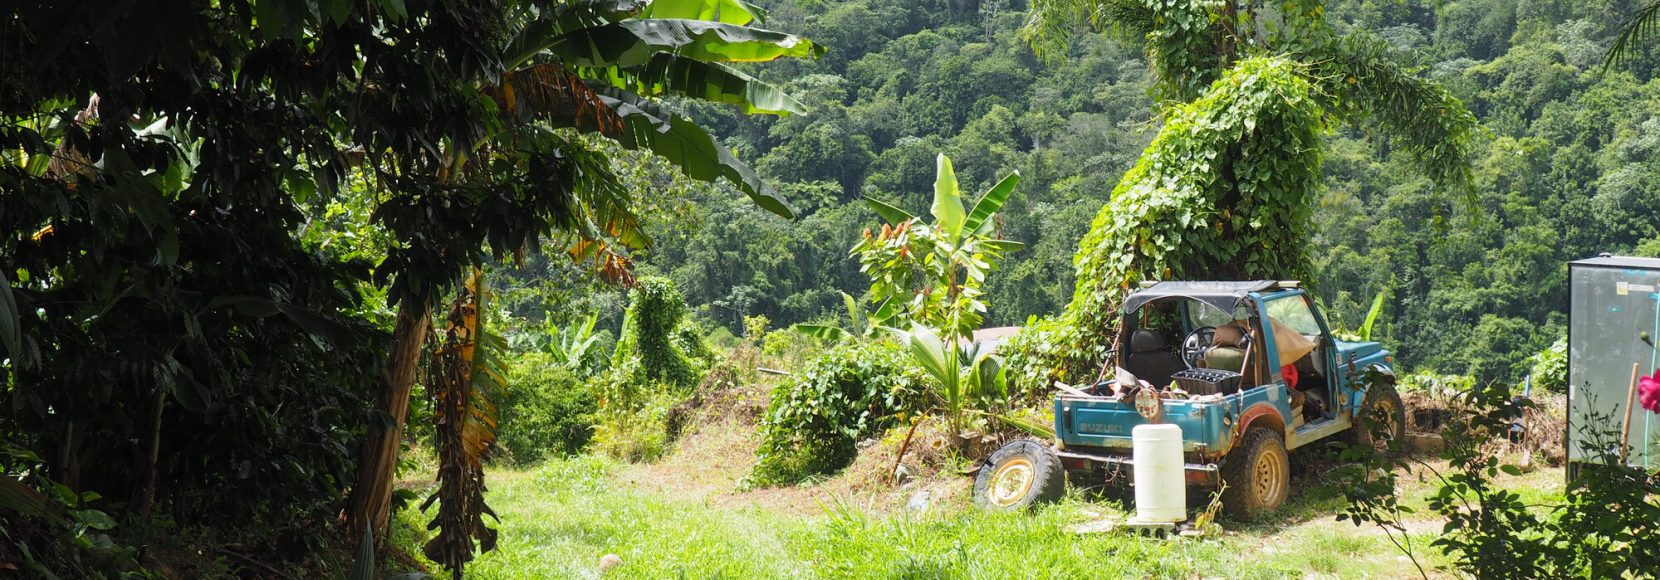 In 2022, Ashley Thompson visited several coffee farmers in Adjuntas, Puerto Rico to see their recovery since Hurricane Maria, which took place five years prior. The farmers included Agueda Ortiz, Rafael Rodriguez and his wife Joanna Rodriguez and their children Ariana Vanessa and Emily Rose, and Jose Roman.